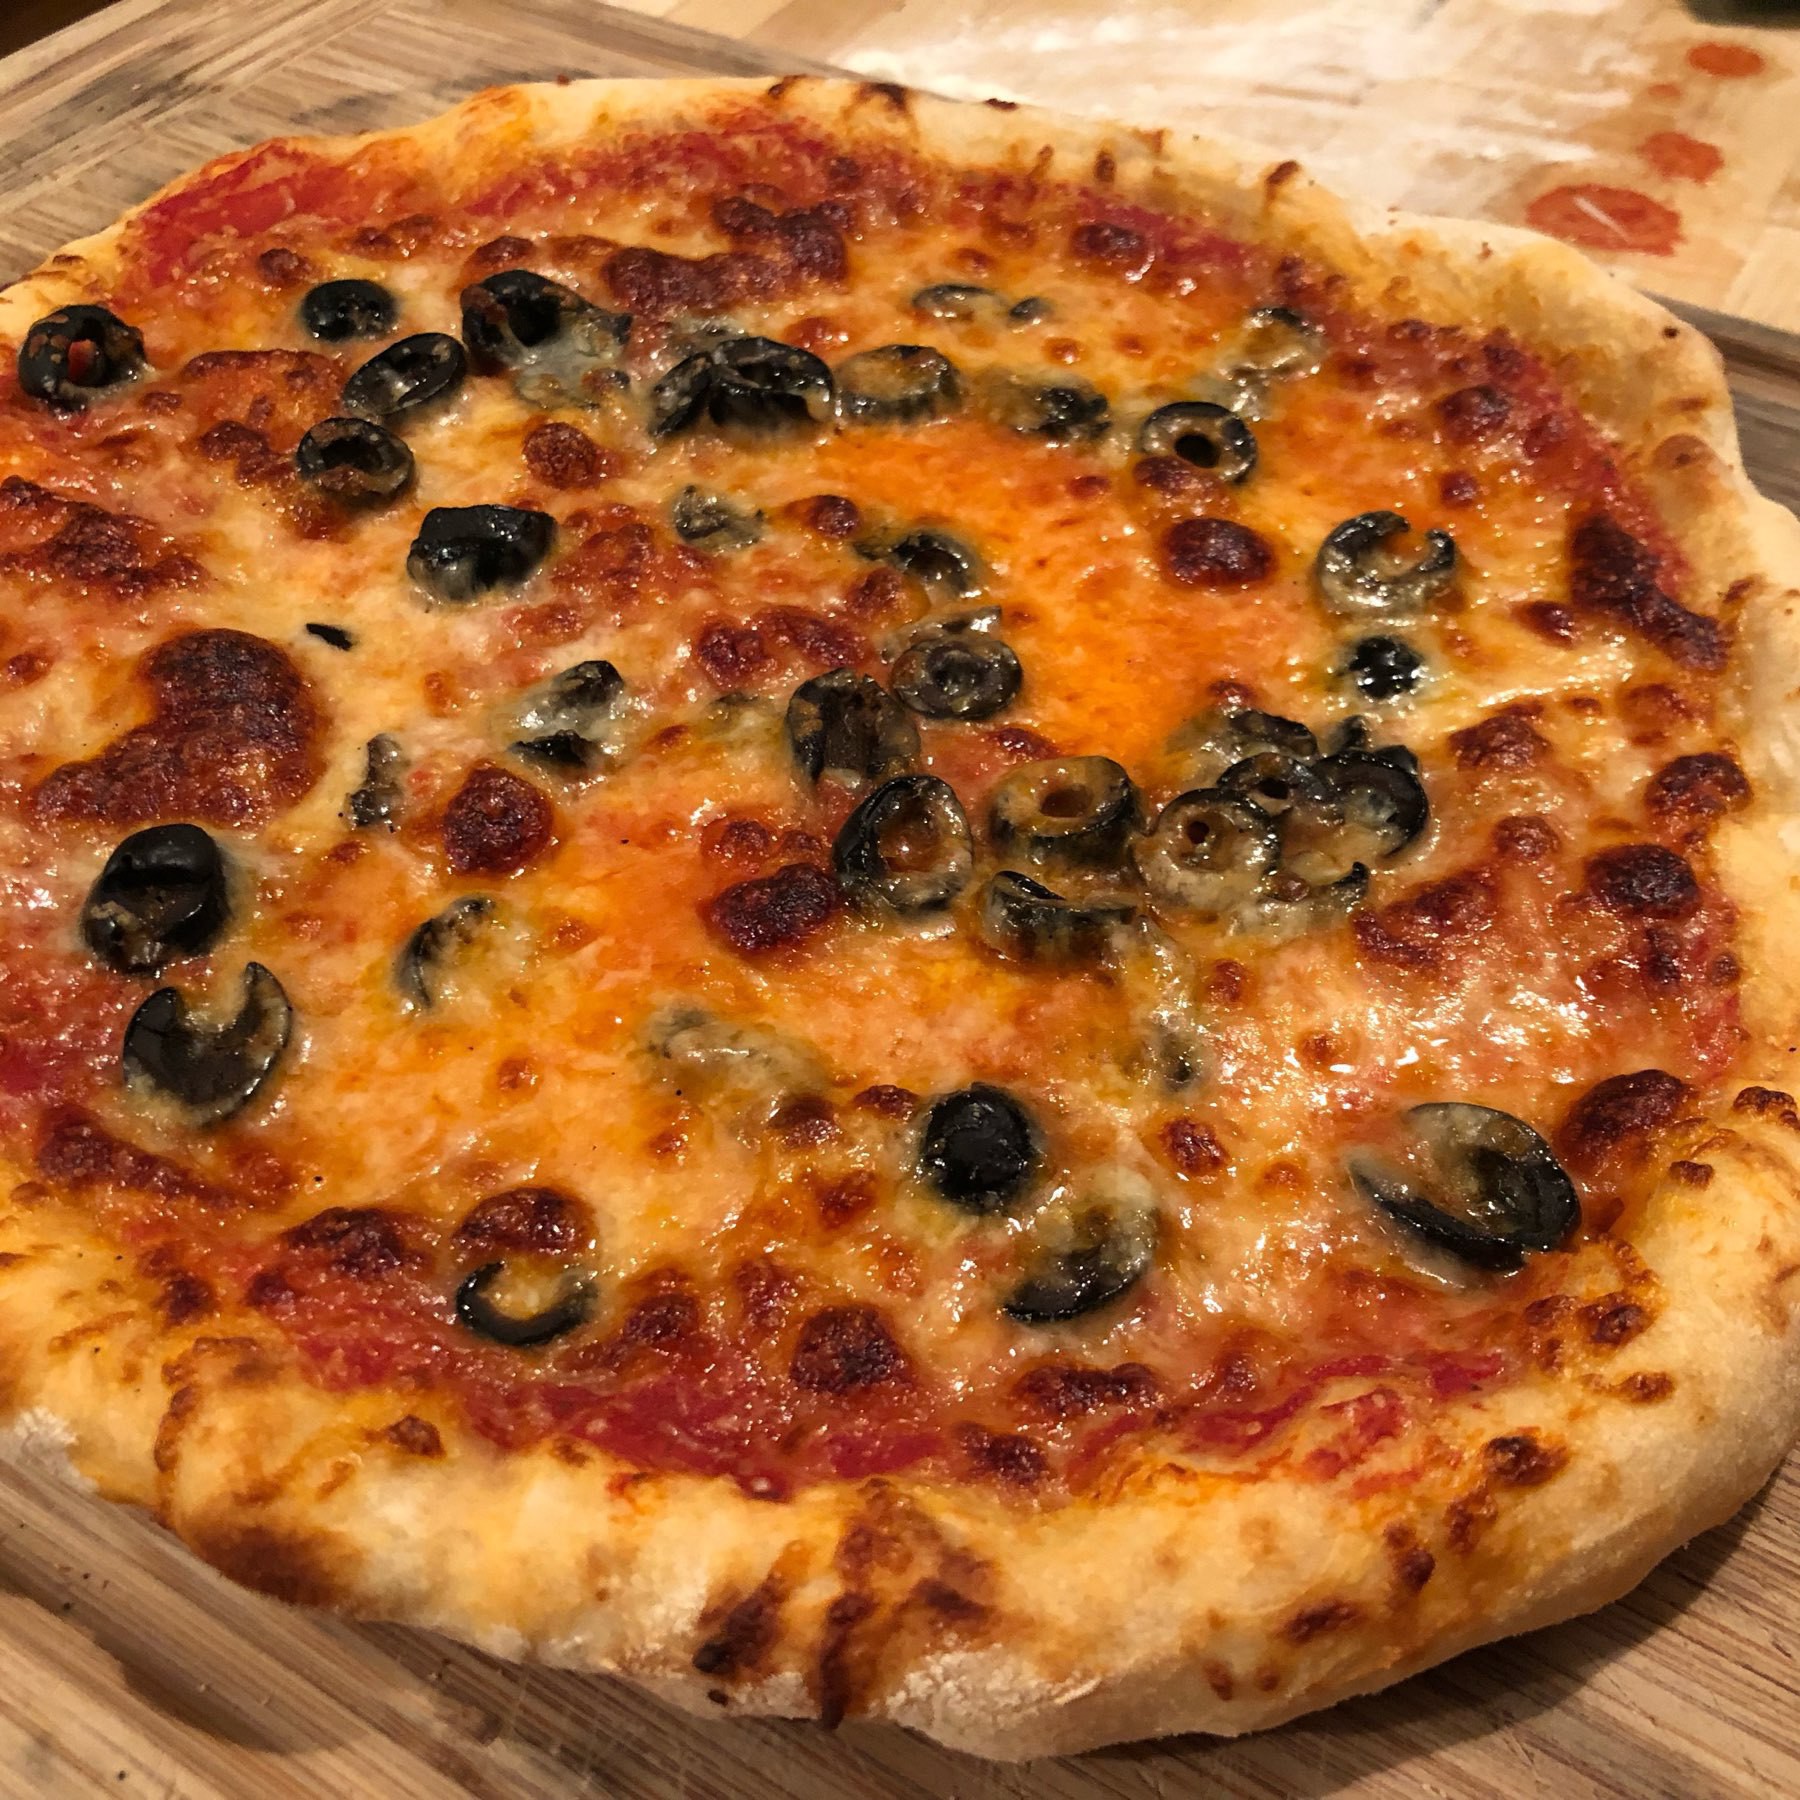 Homemade pizza with cheese and black olives.